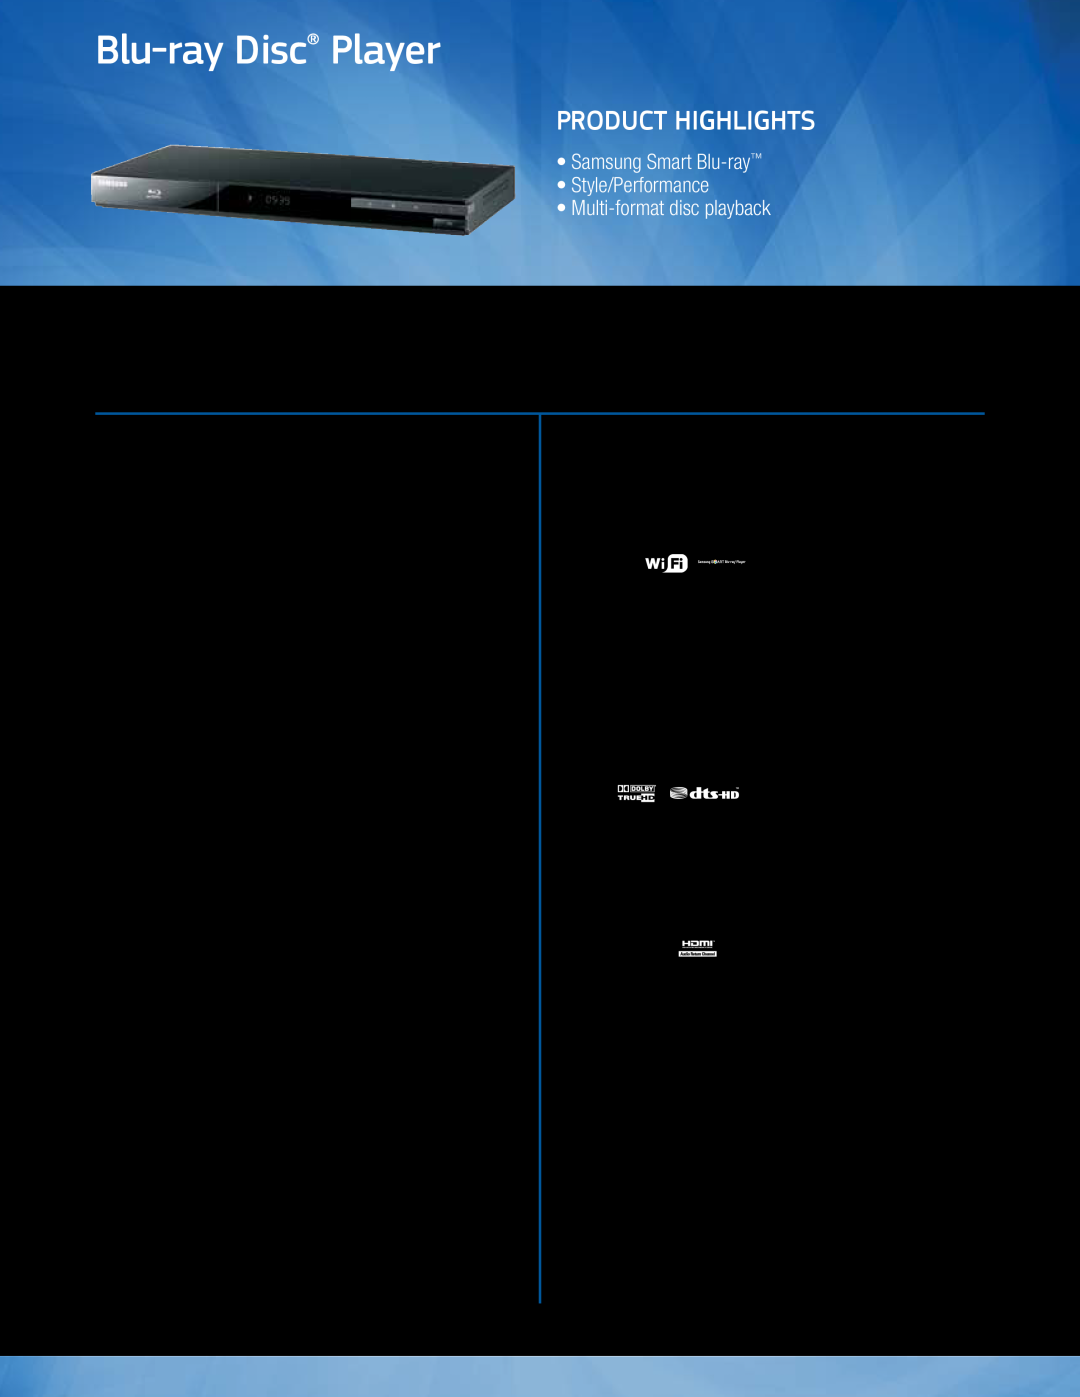 Samsung BD-D5300 dimensions Samsung Smart Blu-ray Style/Performance Multi-format disc playback, Blu-ray Disc Player, Audio 